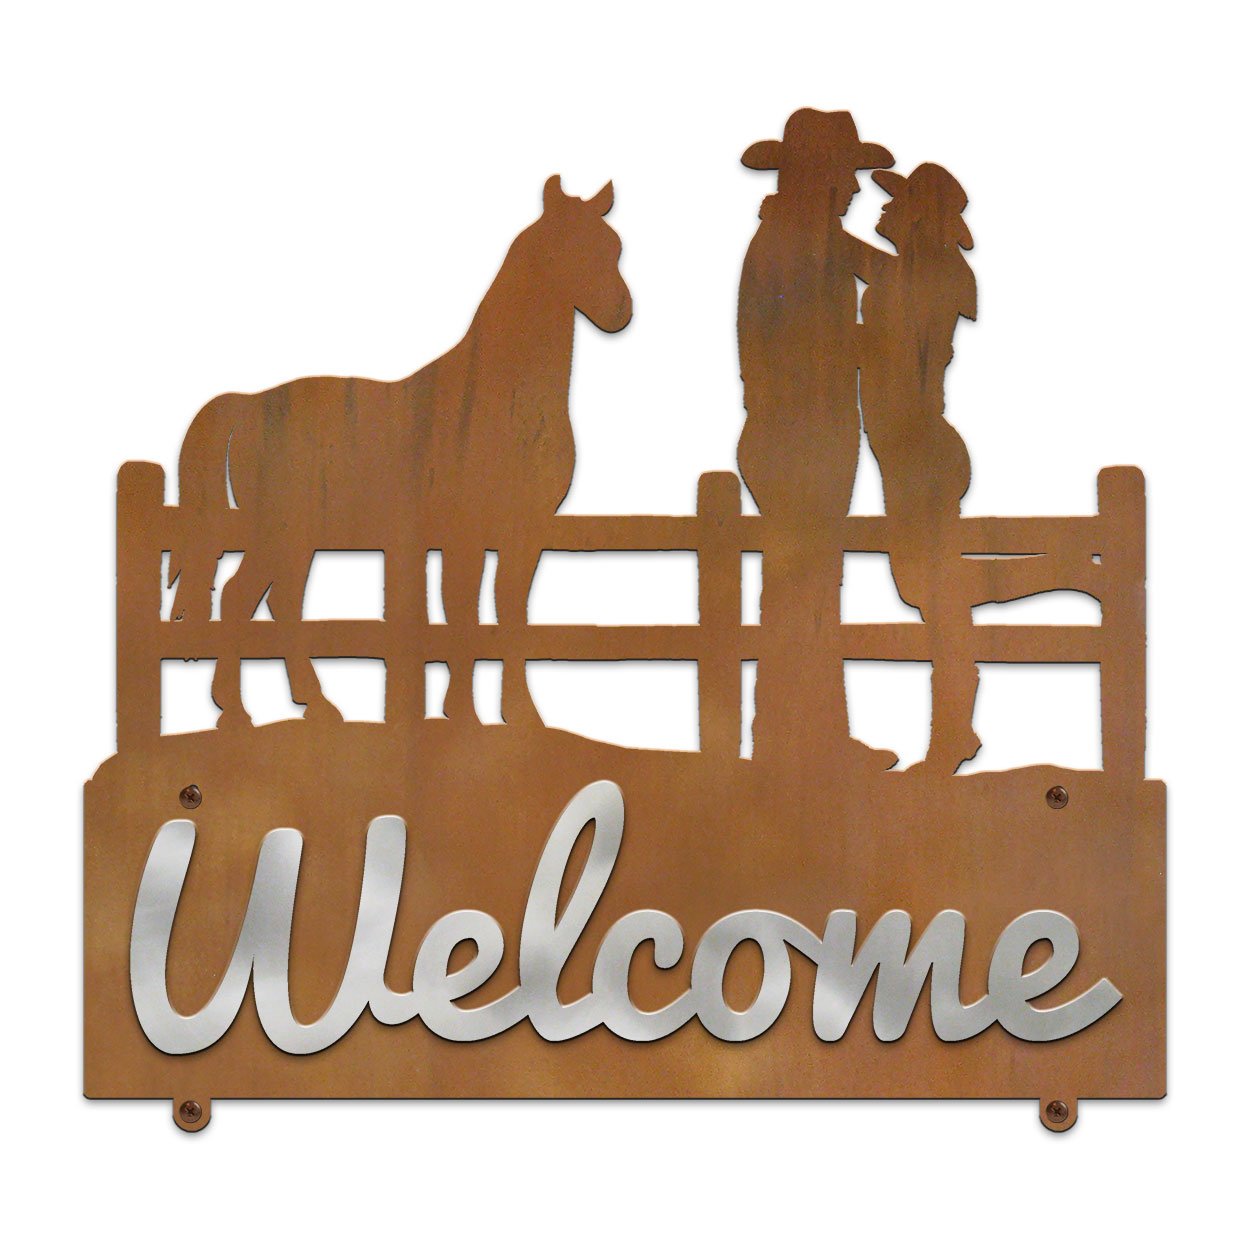 607118 - Cowboy Couple with Horse Design Horizontal Metal Welcome Wall Plaque